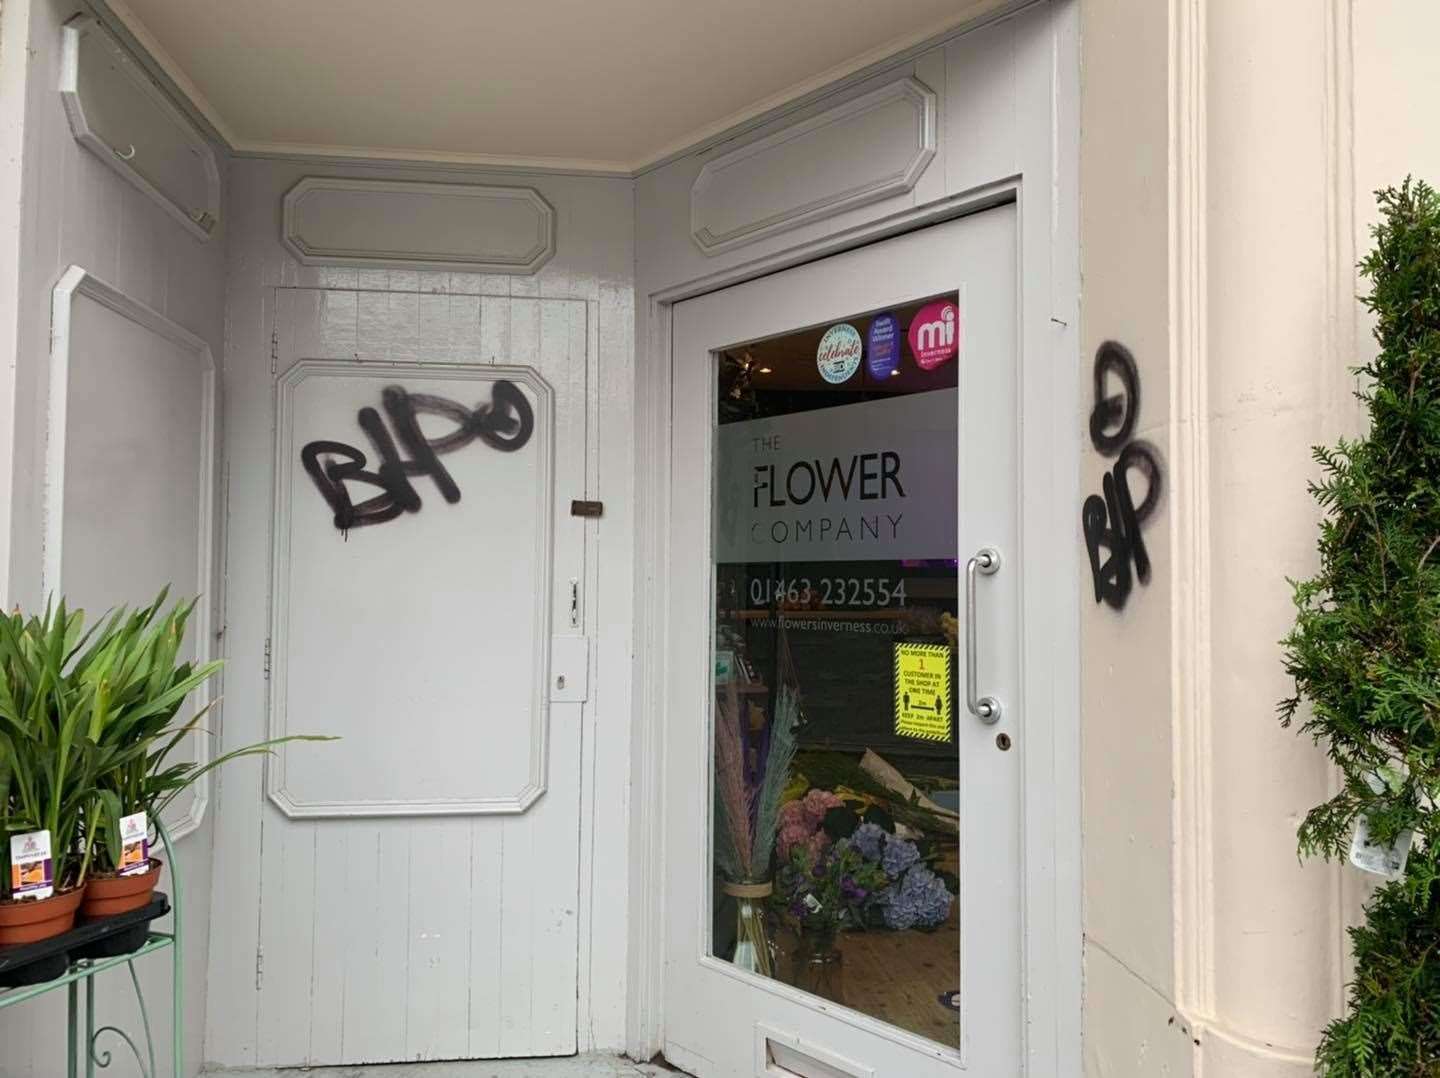 The outside of The Flower Company has been 'tagged' by vandals.